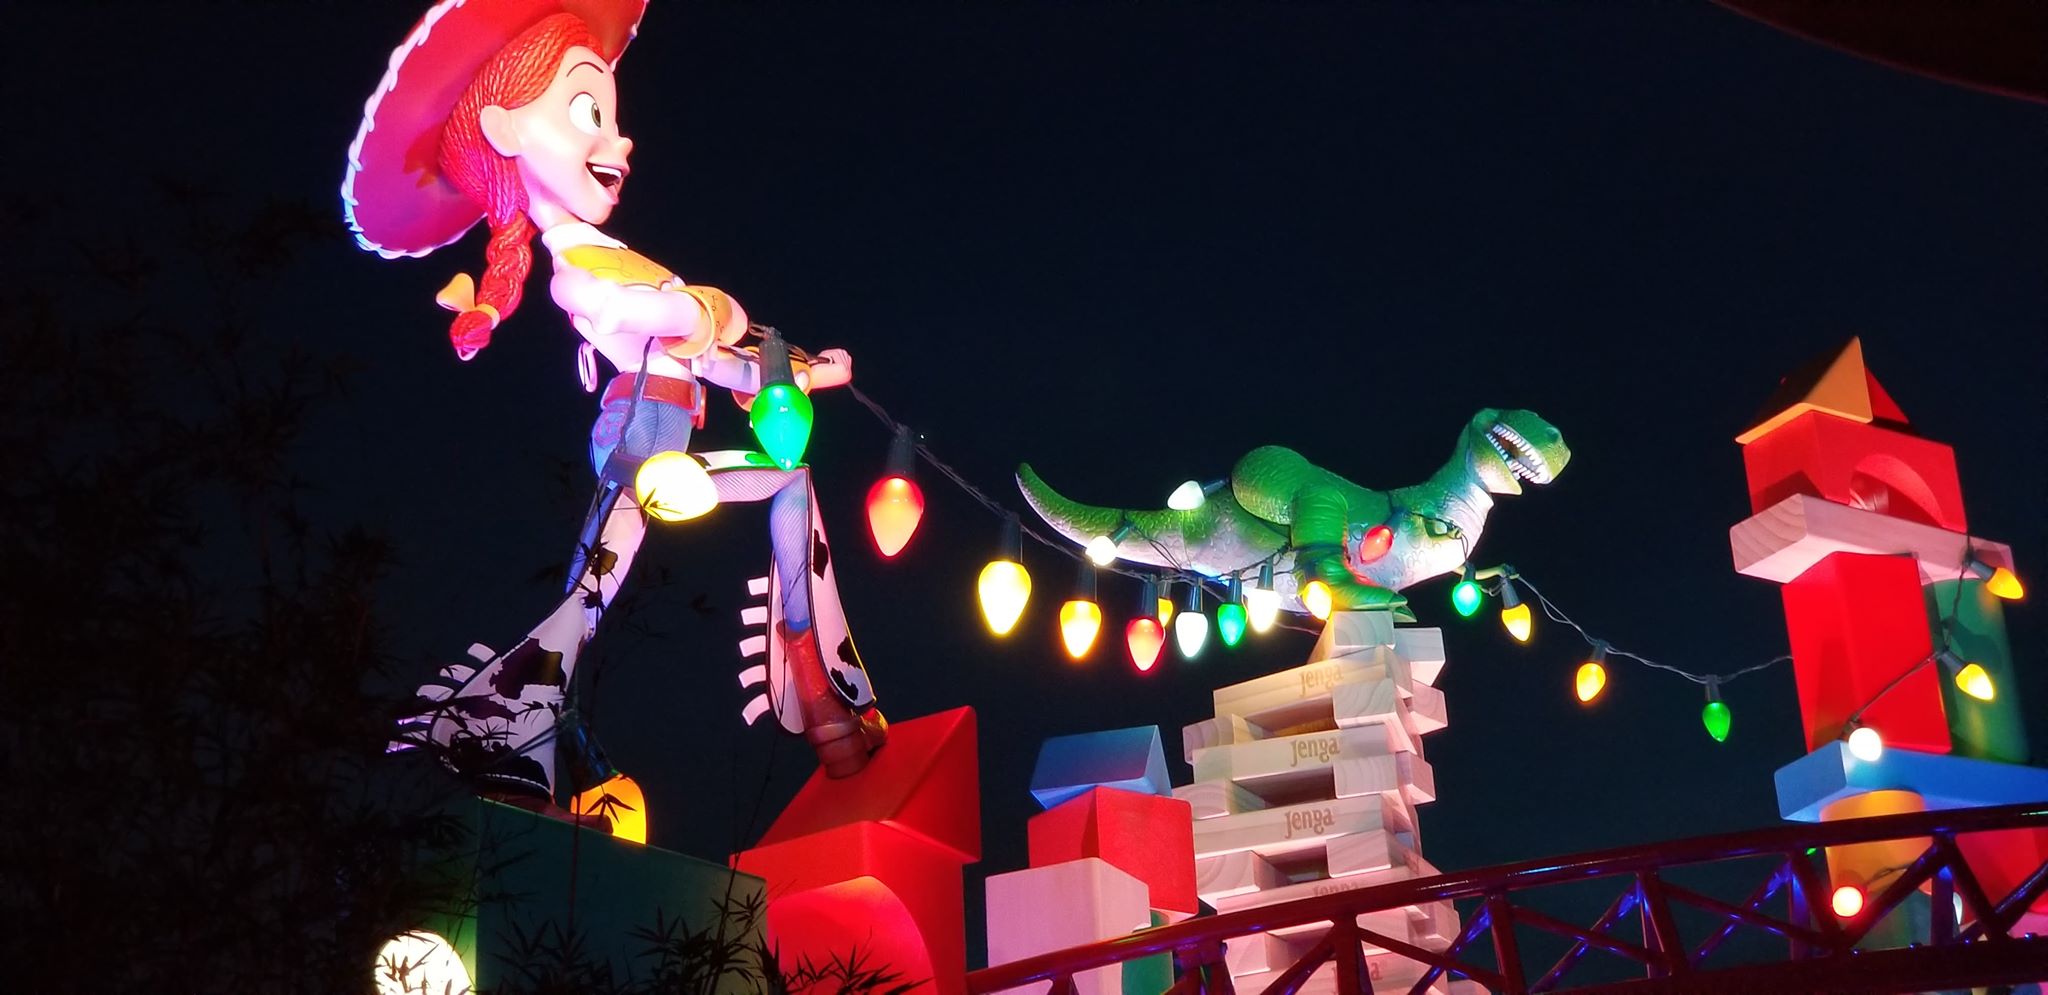 Registration Now Open for Passholder Play Time at Toy Story Land!